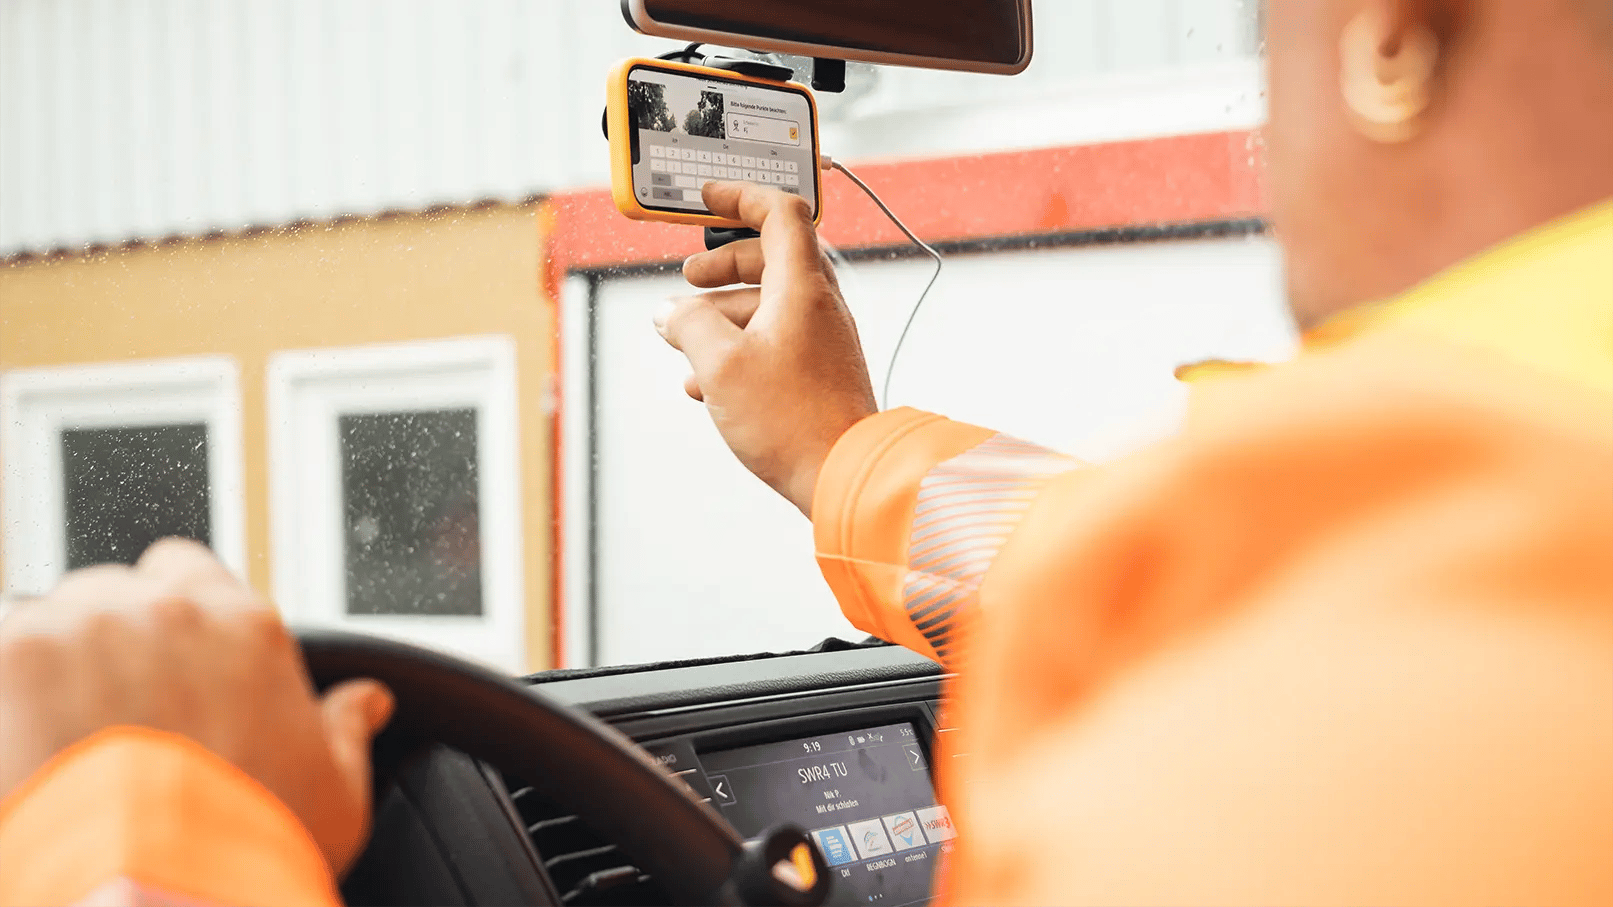 vialytics phone being used while being attached to the windshield of a car